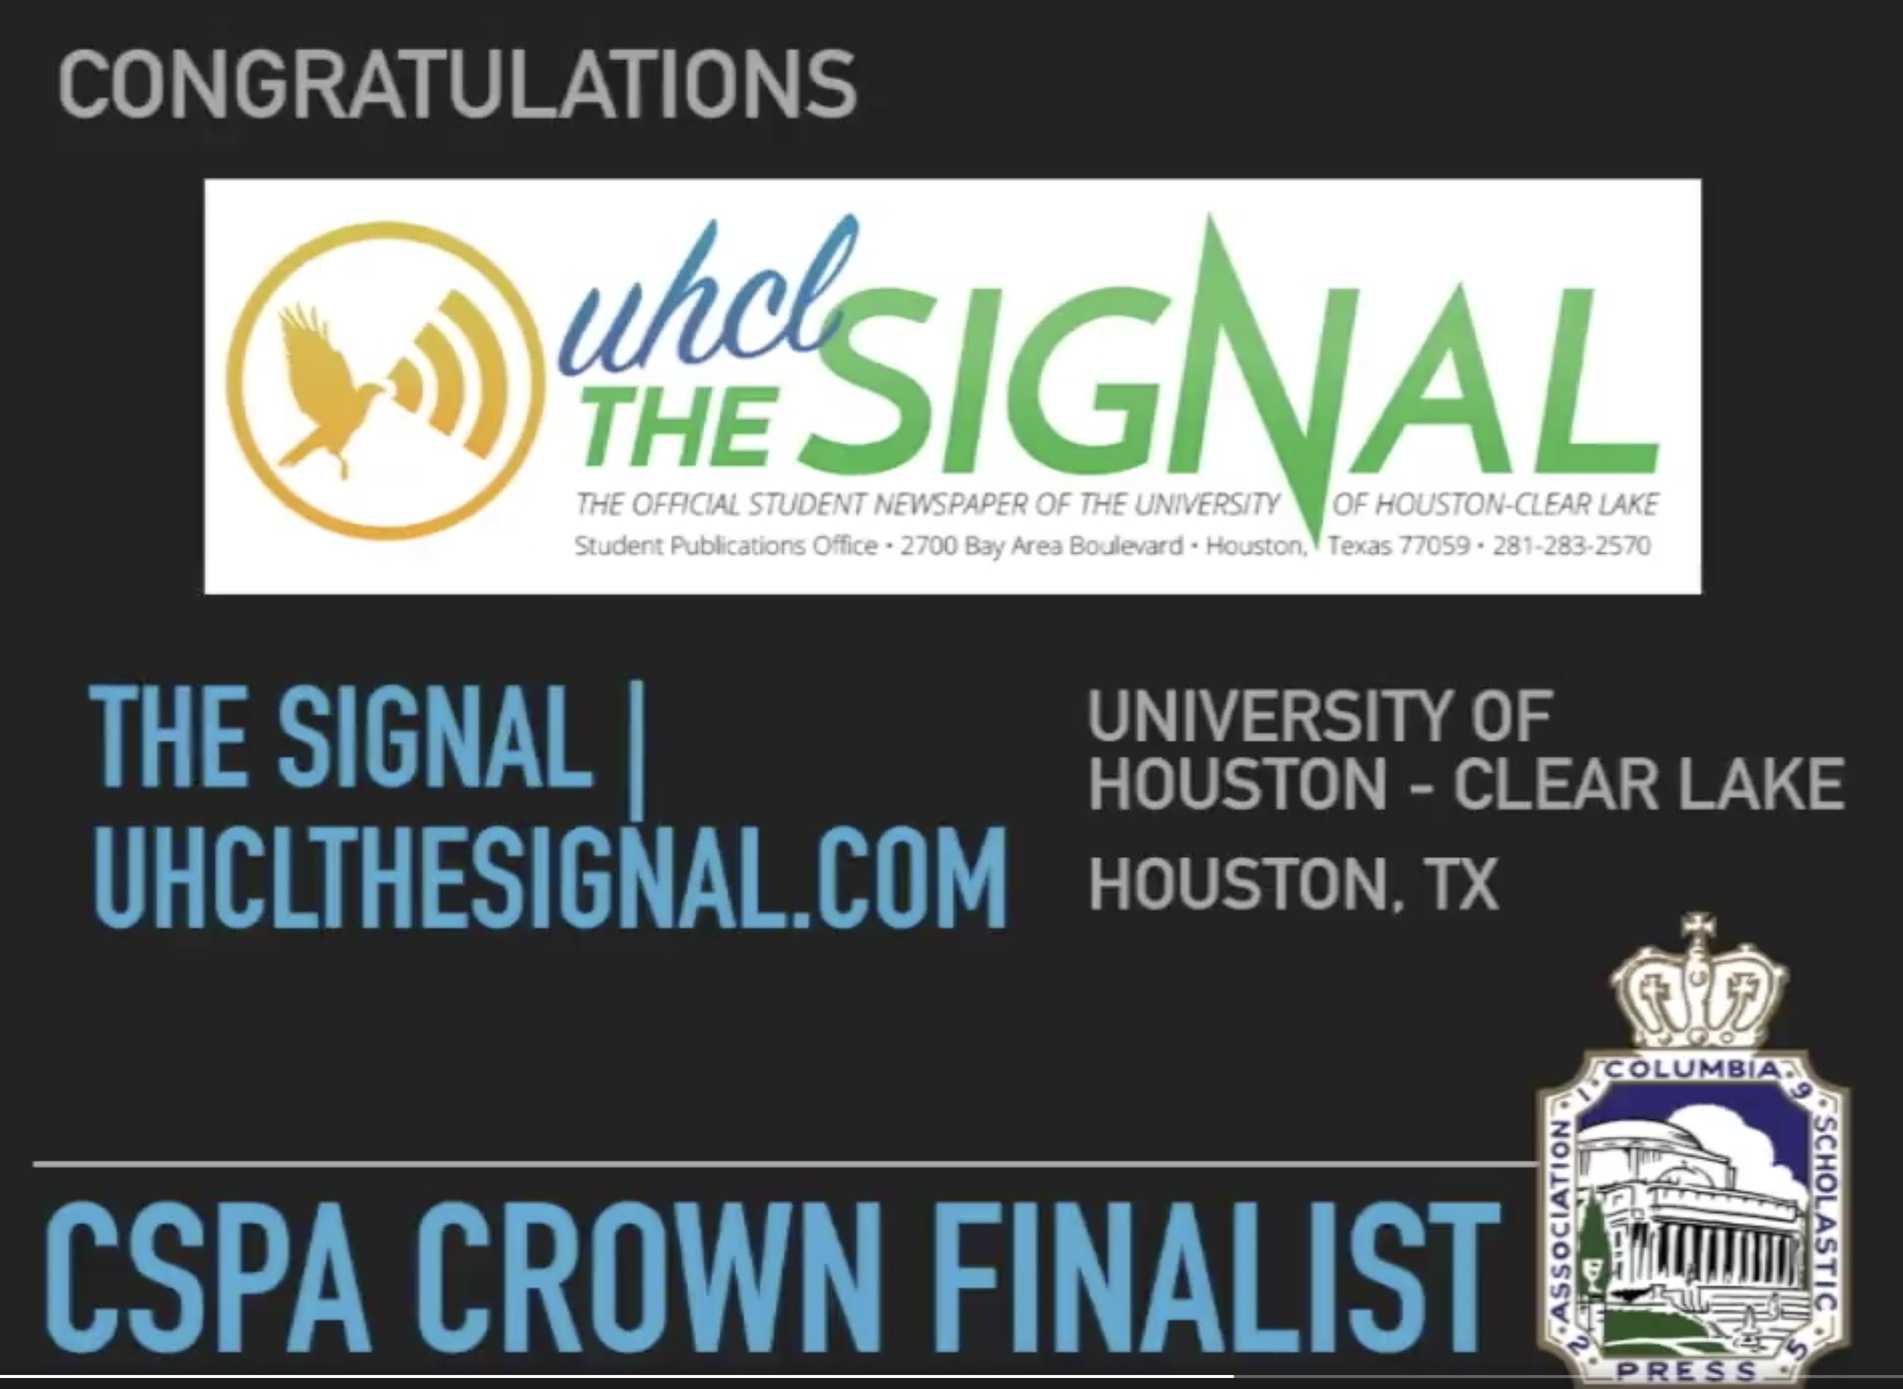 GRAPHIC: UHCL's The Signal is a 2019 CSPA Crown Award Finalist. Graphic courtesy of CSPA.